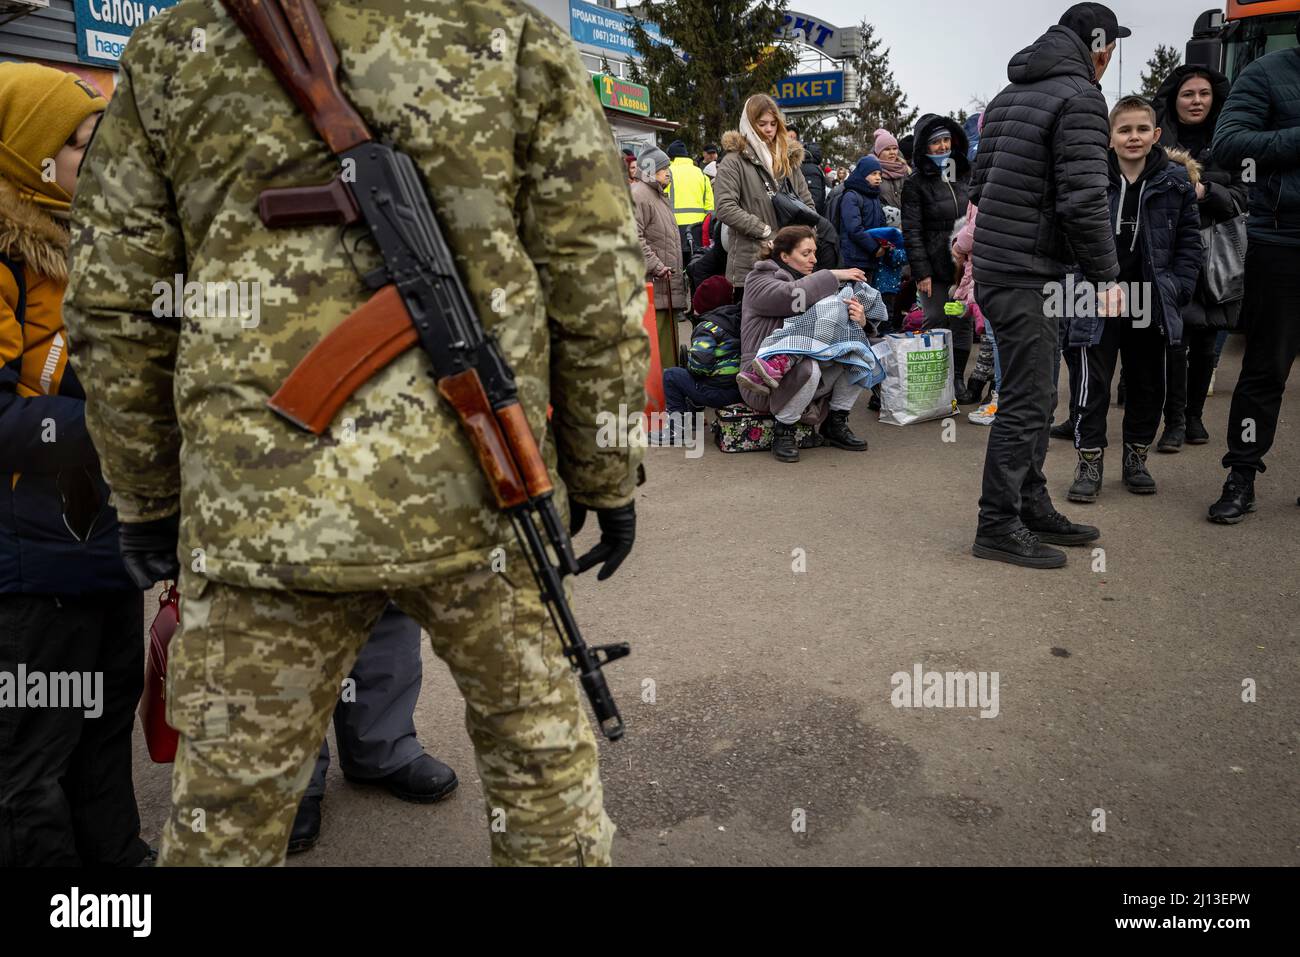 Arrival of refugees from Ukraine on the Ukrainian side of the border crossing in Shehyni. Here the refugees wait, in long queues, for clearance by Ukrainian border officials. After entering Poland, they are provided with hot food and clothing, and then transferred by bus to large sites or collective shelters. Stock Photo